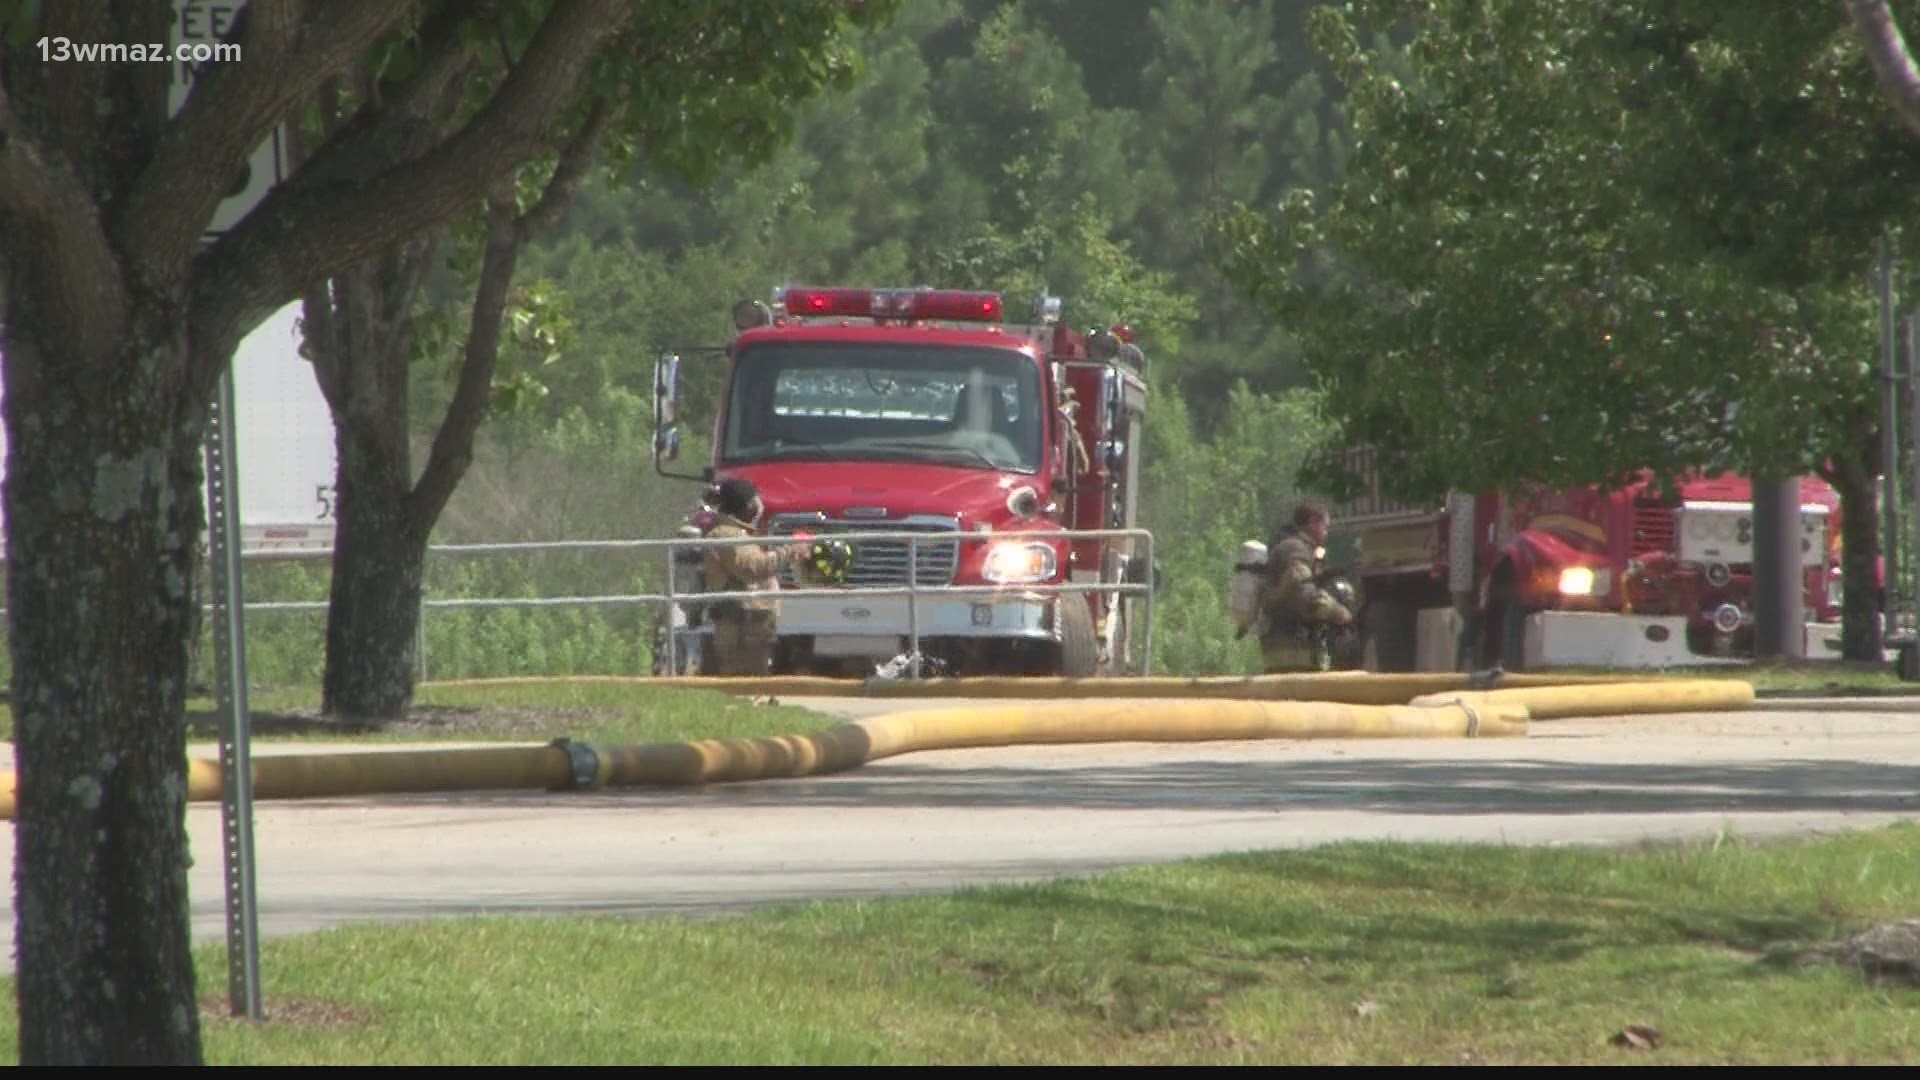 The order came after a fire broke out at Olin Chemical plant this morning following what the Crawford County fire department called a chemical reaction.